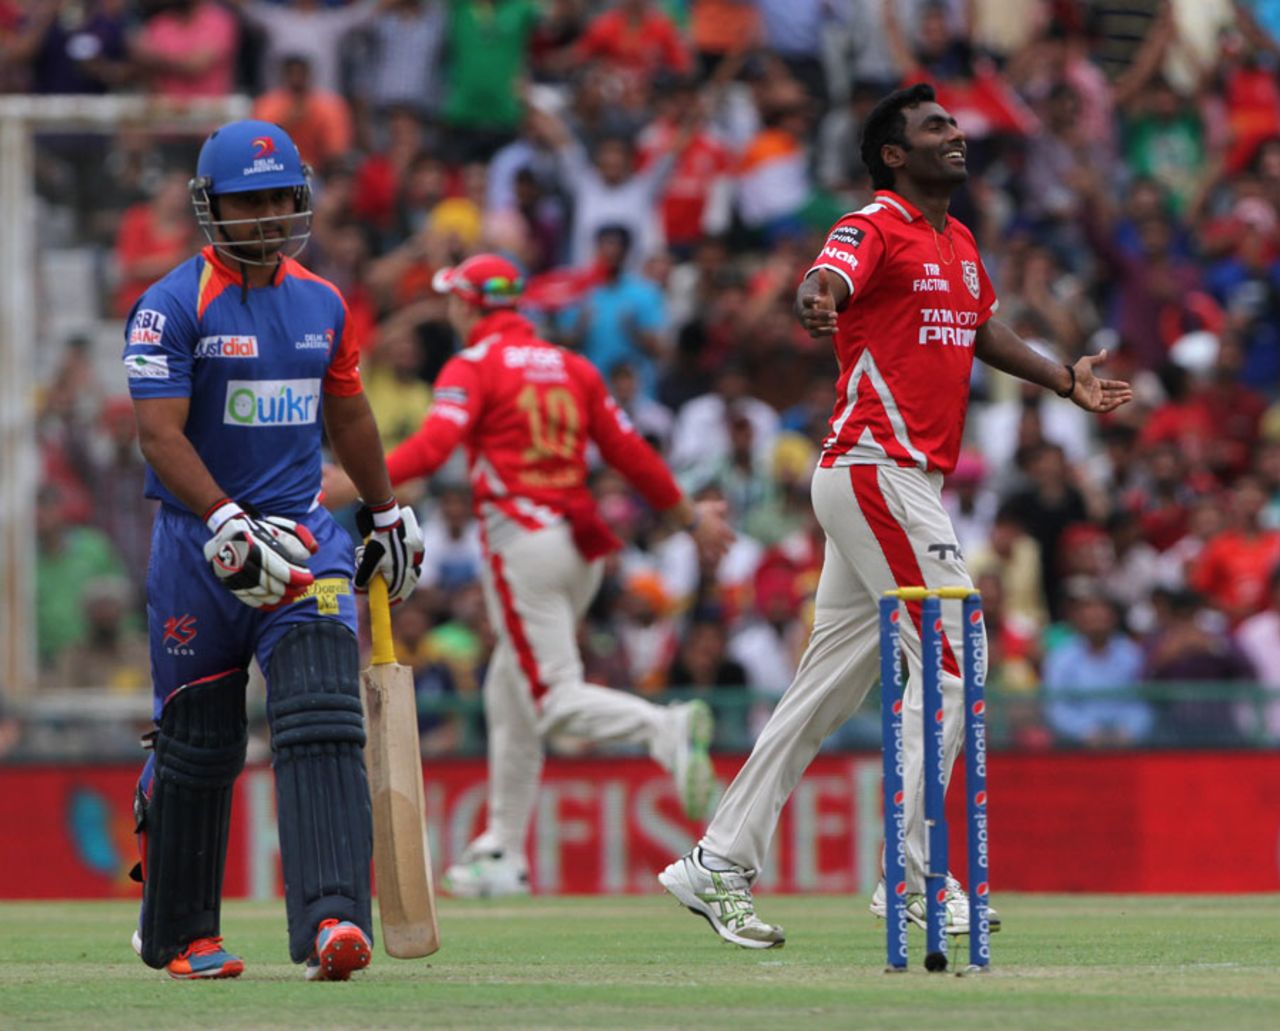 Parvinder Awana picked up two wickets in the sixth over, Kings XI Punjab v Delhi Daredevils, IPL 2014, Mohali, May 25, 2014